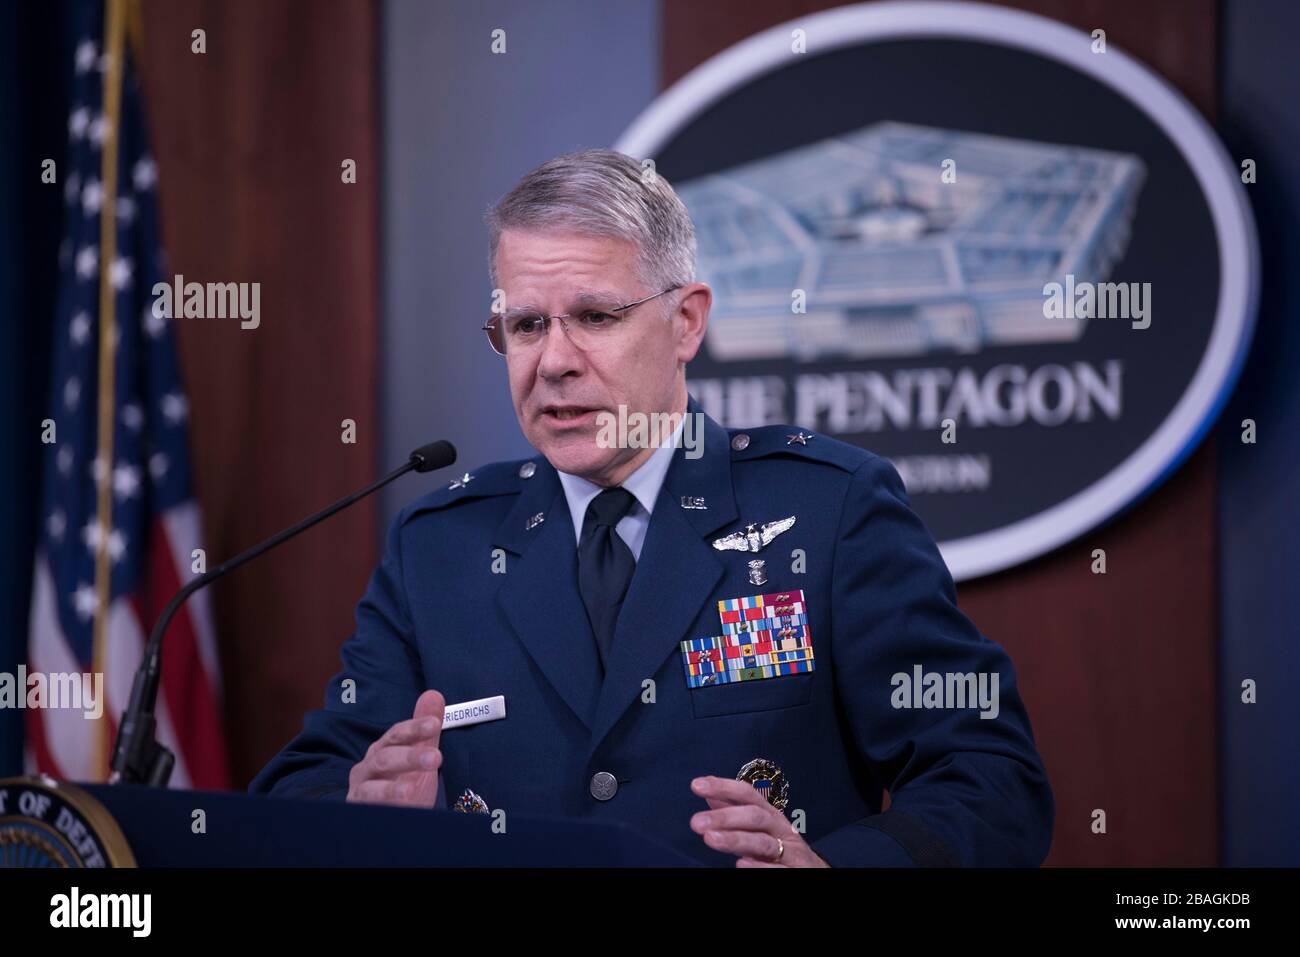 U.S. Joint Staff Surgeon Air Force Brig. Gen. Paul Friedrichs, MD,, briefs reporters on the COVID-19 pandemic at the Pentagon March 25, 2020 in Arlington, Virginia. Stock Photo